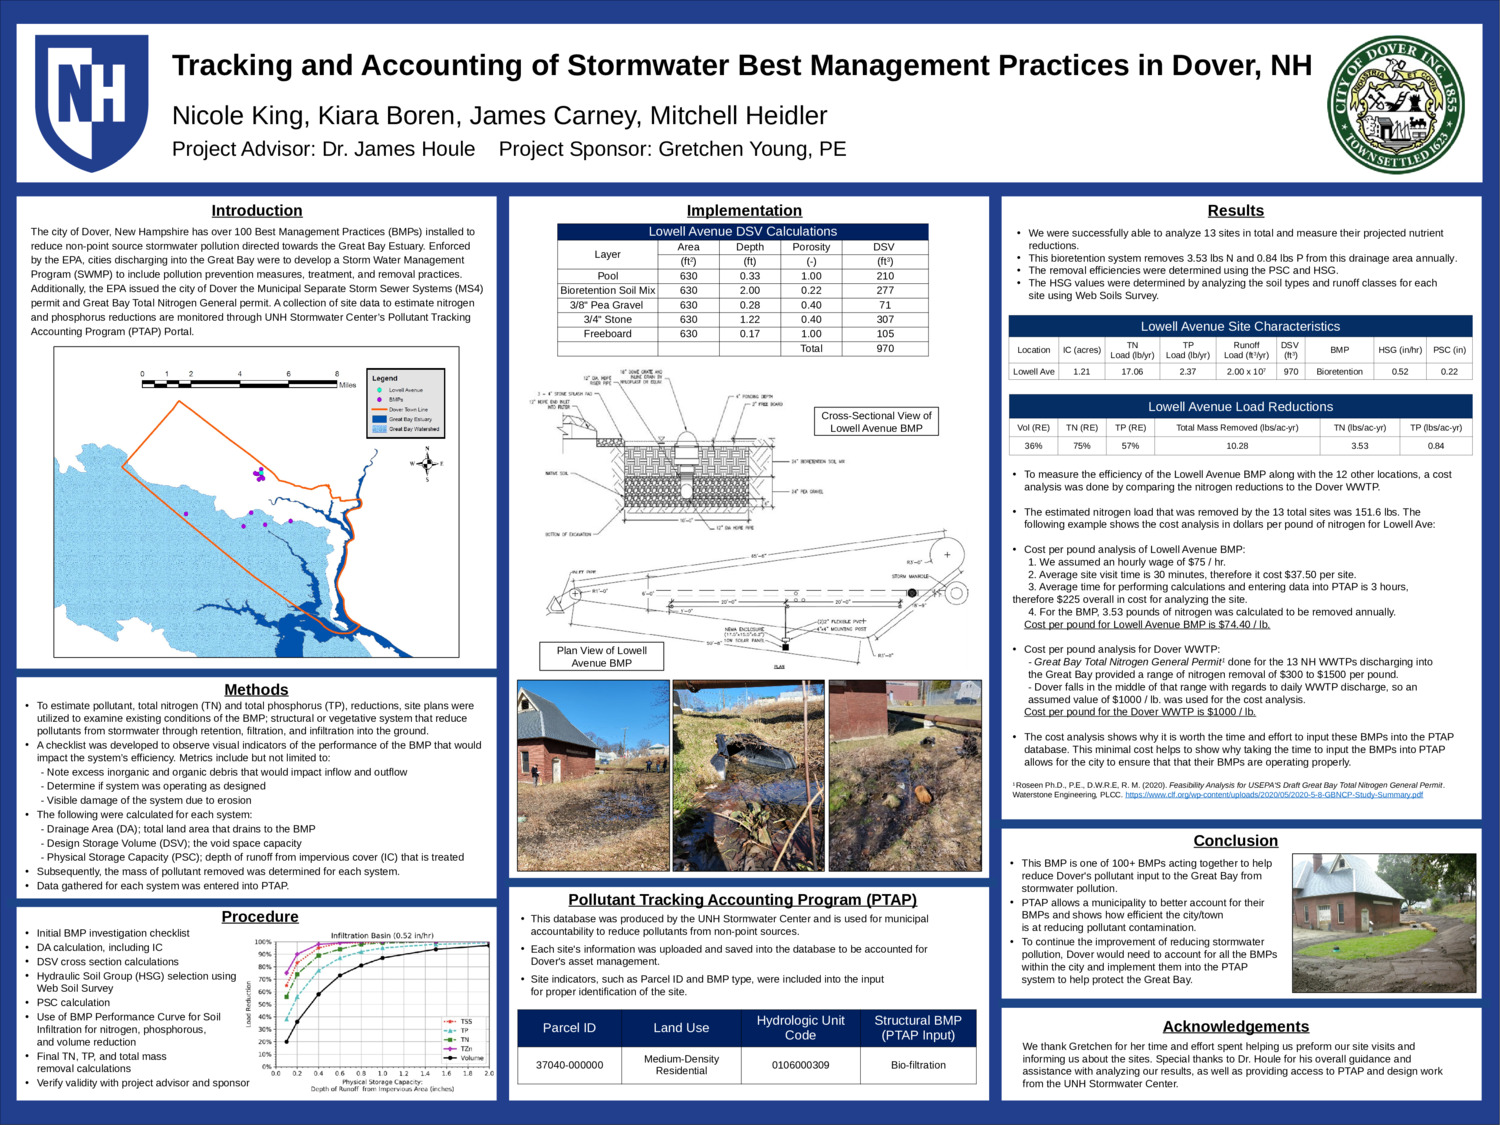 Tracking And Accounting Of Stormwater Best Management Practices In Dover, Nh by NKing18